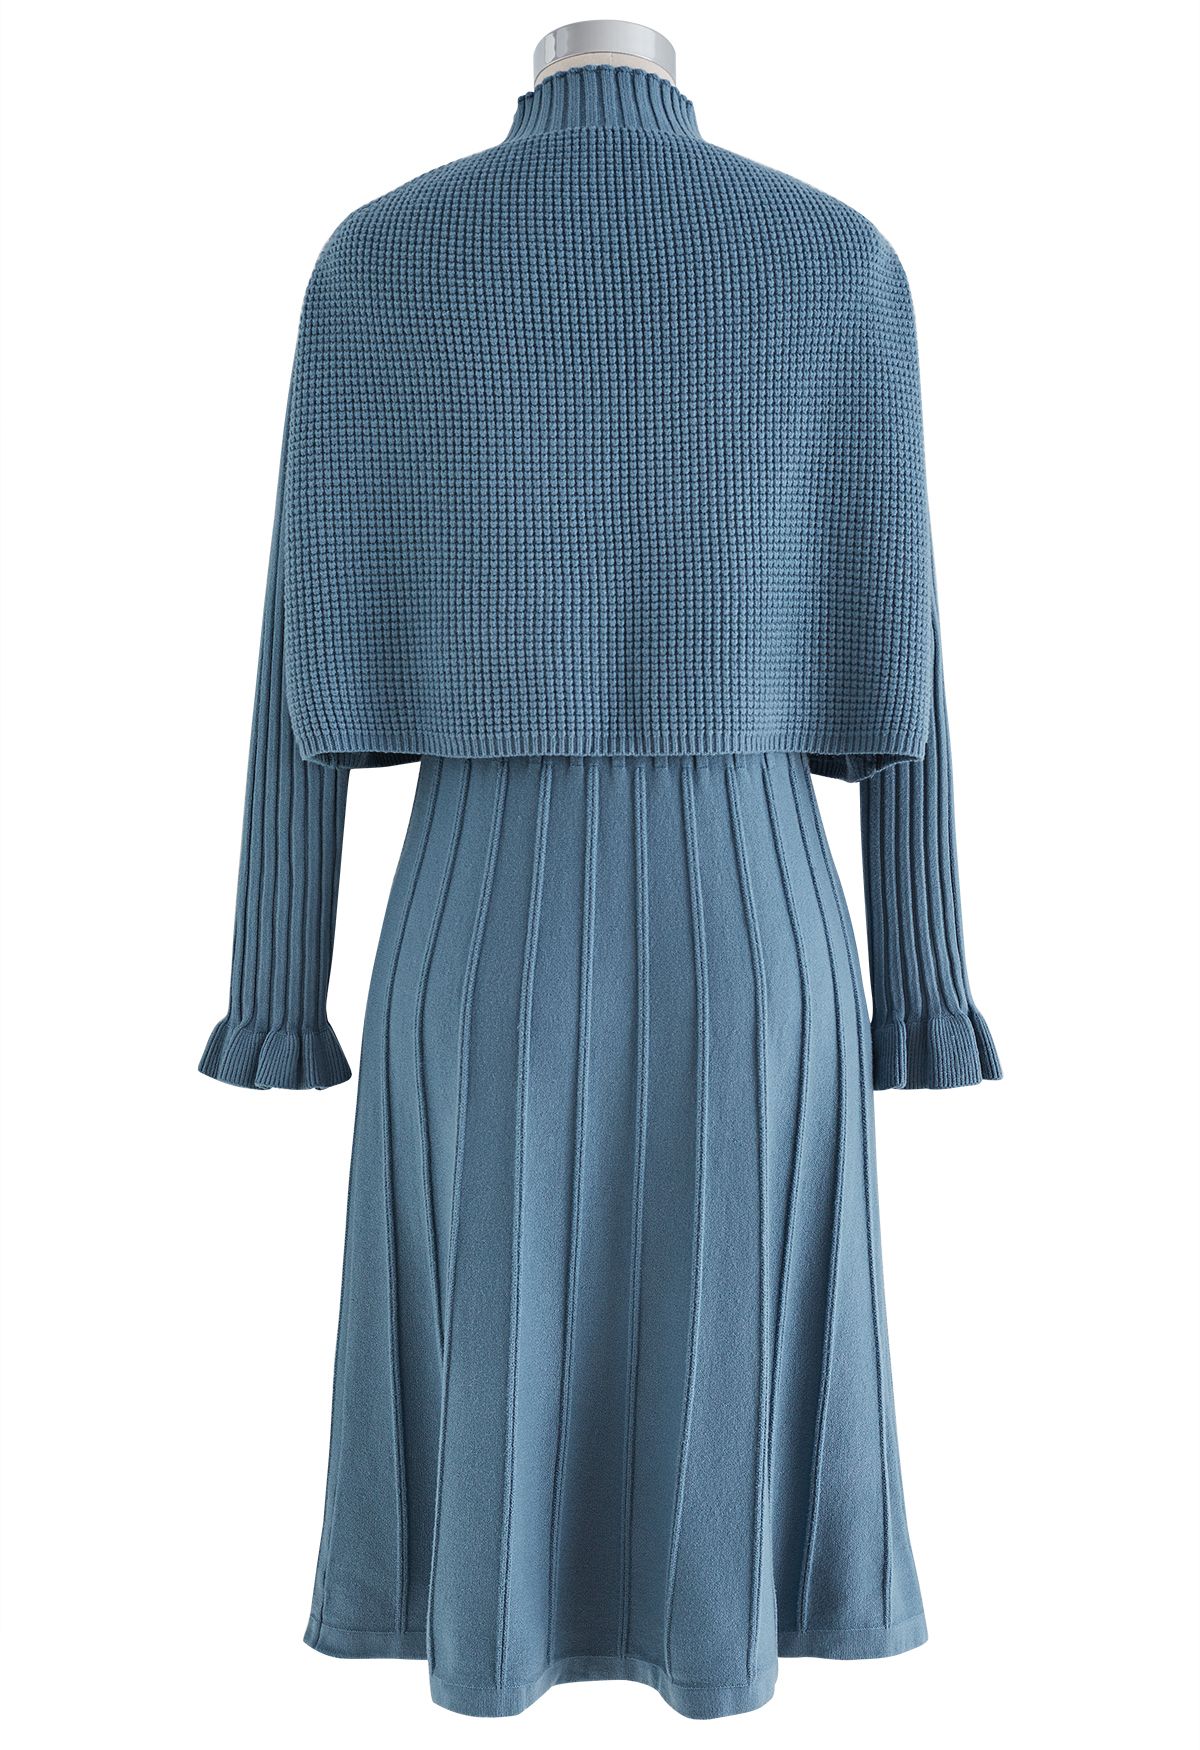 Mock Neck Pleated Knit Twinset Dress in Teal